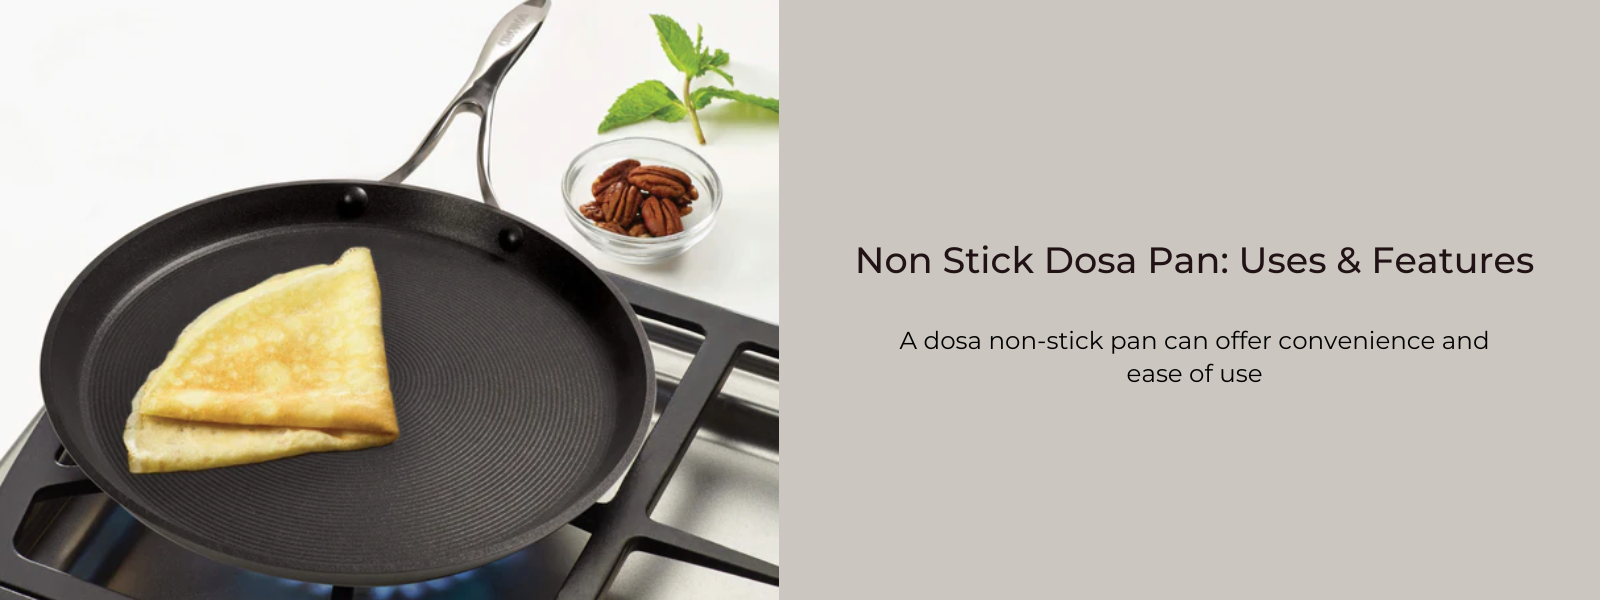 Best Non Stick Dosa Tawa For Daily Cooking - PotsandPans India